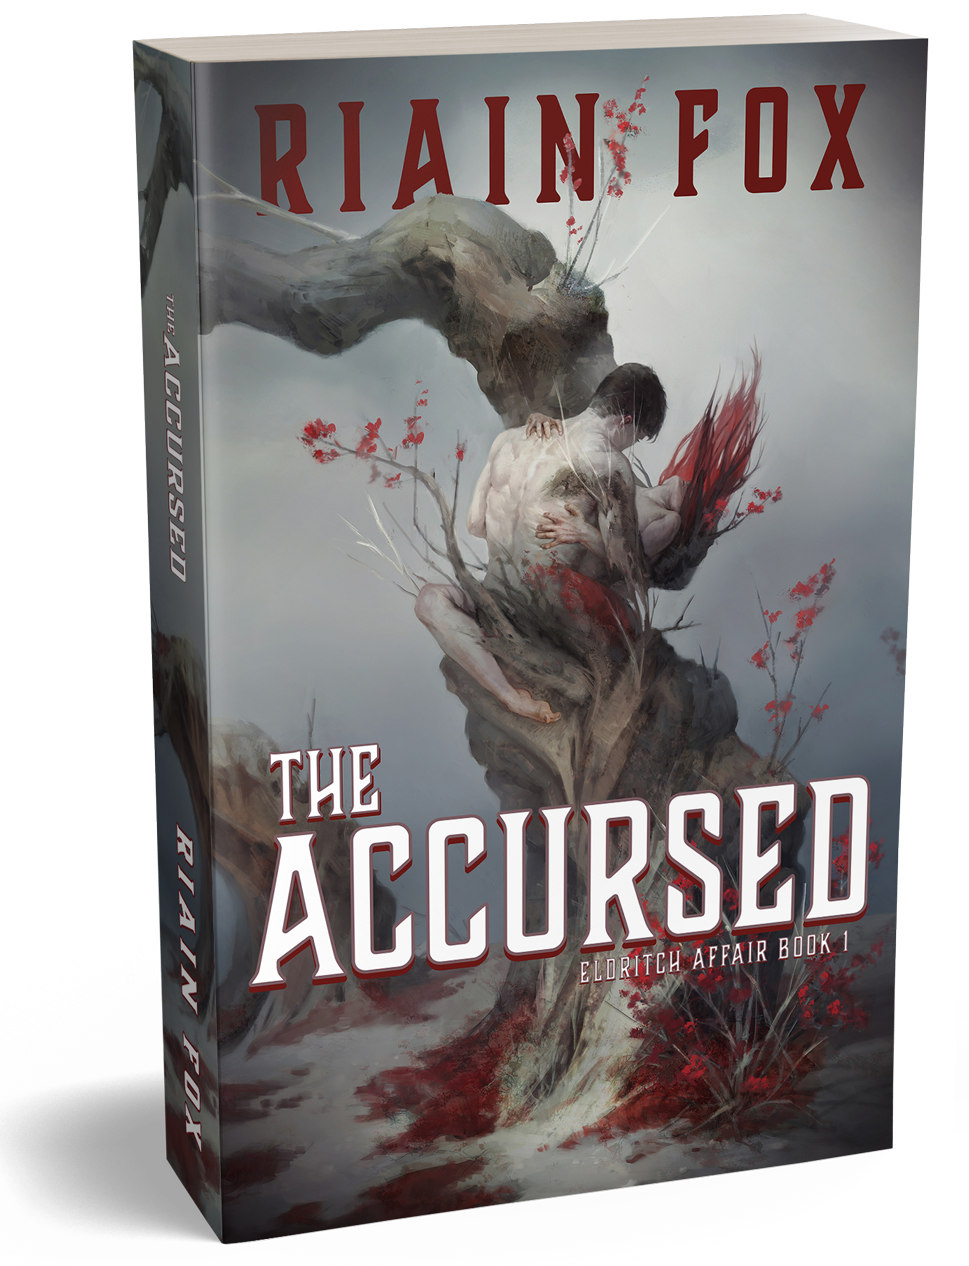 3D rendering of the Accursed paperback book